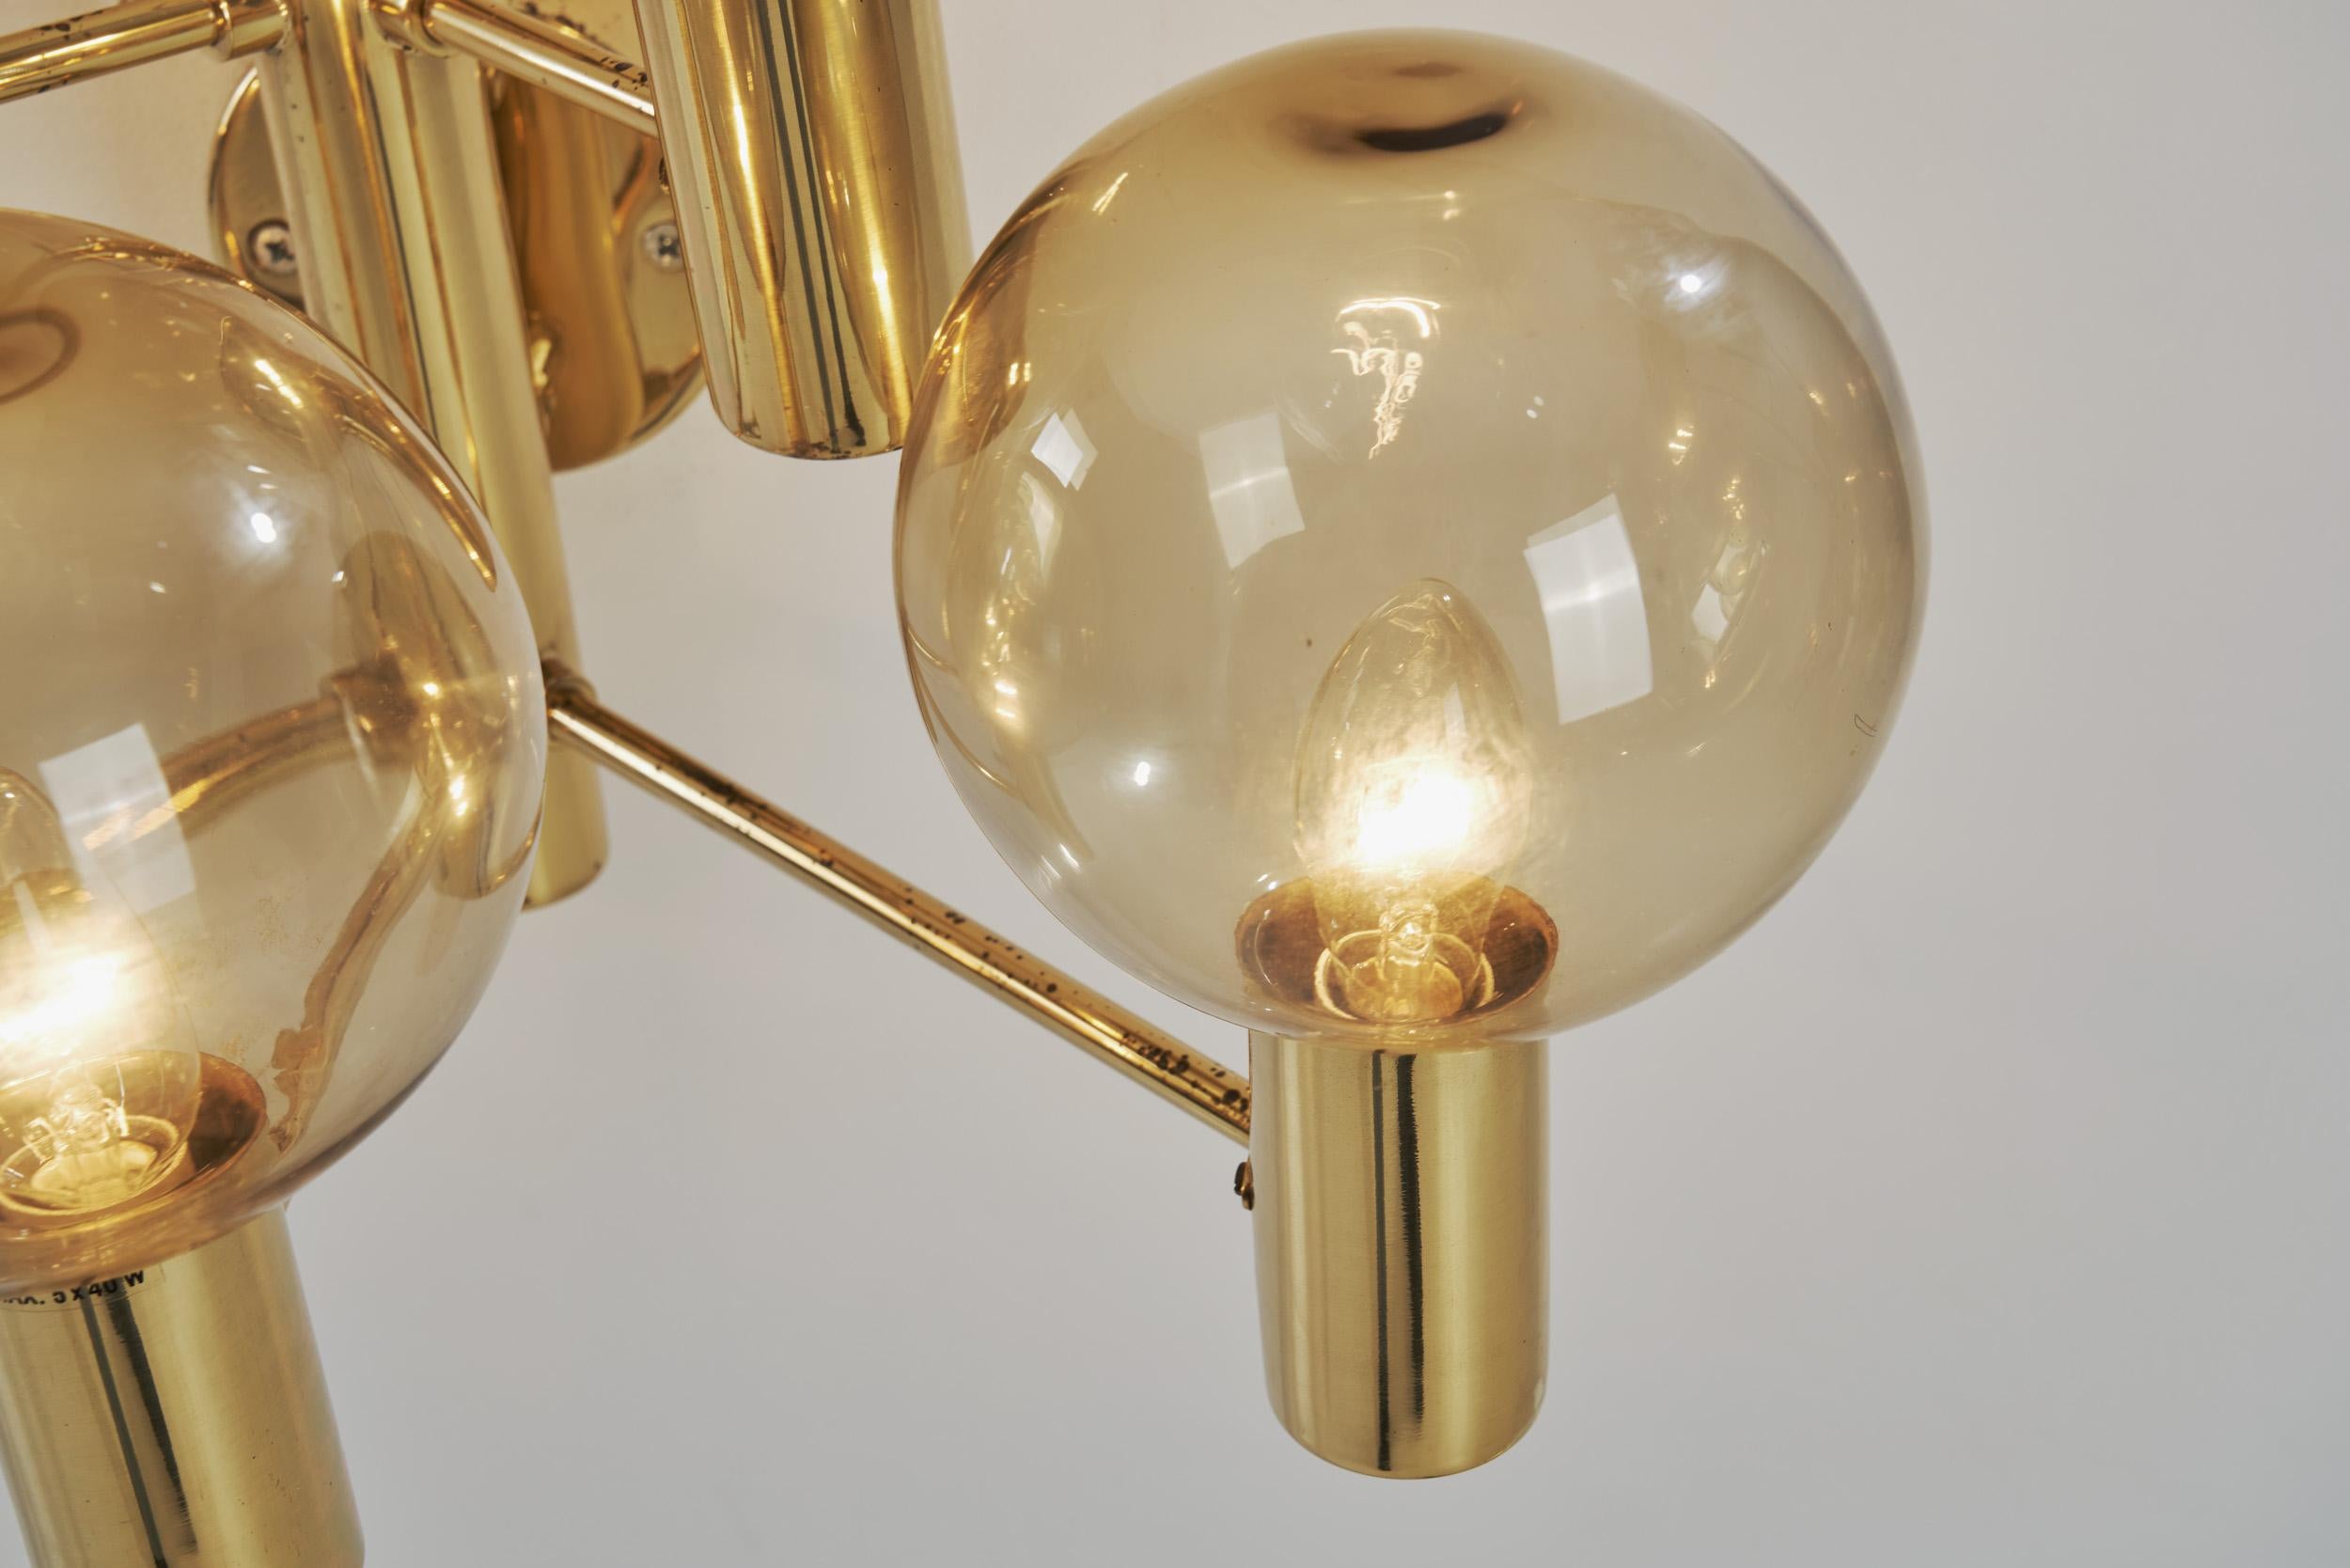 Hans-Agne Jakobsson Brass Wall Lamps with Smoked Glass Shades, Sweden 1960s For Sale 2